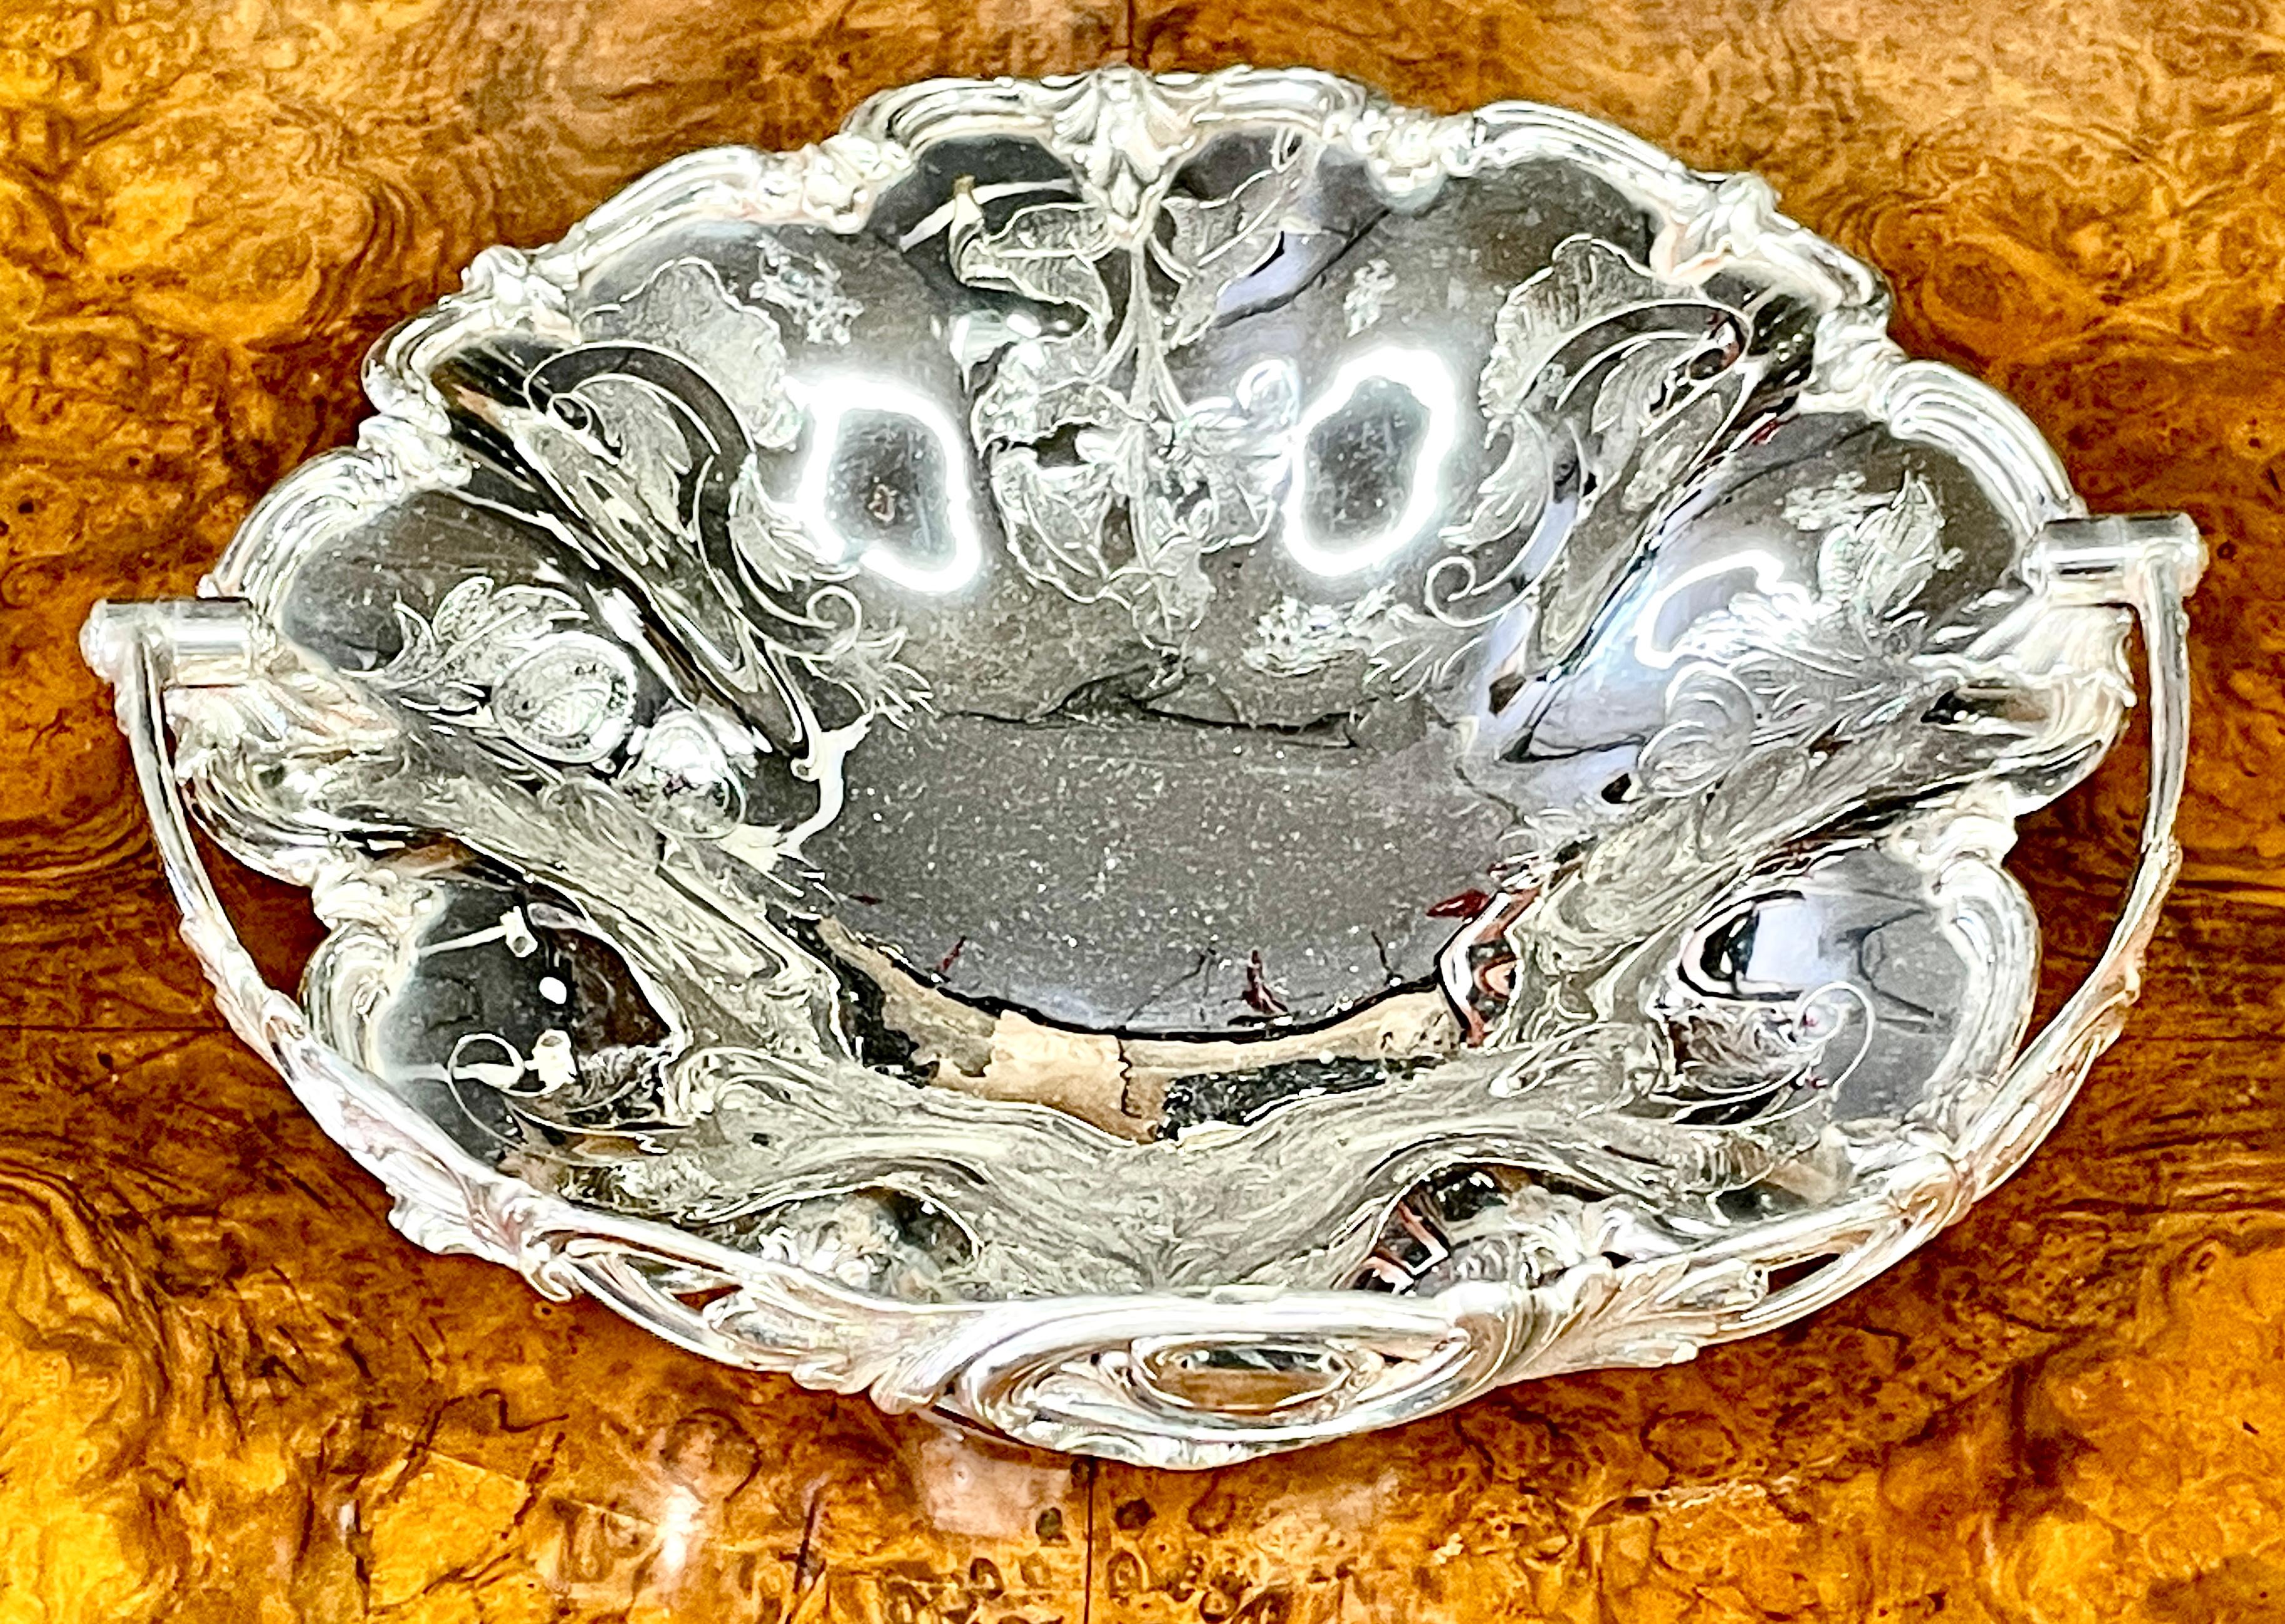 Silver Rare Antique English Old Sheffield Plate period Geo. IV Jas. Dixon round Basket For Sale